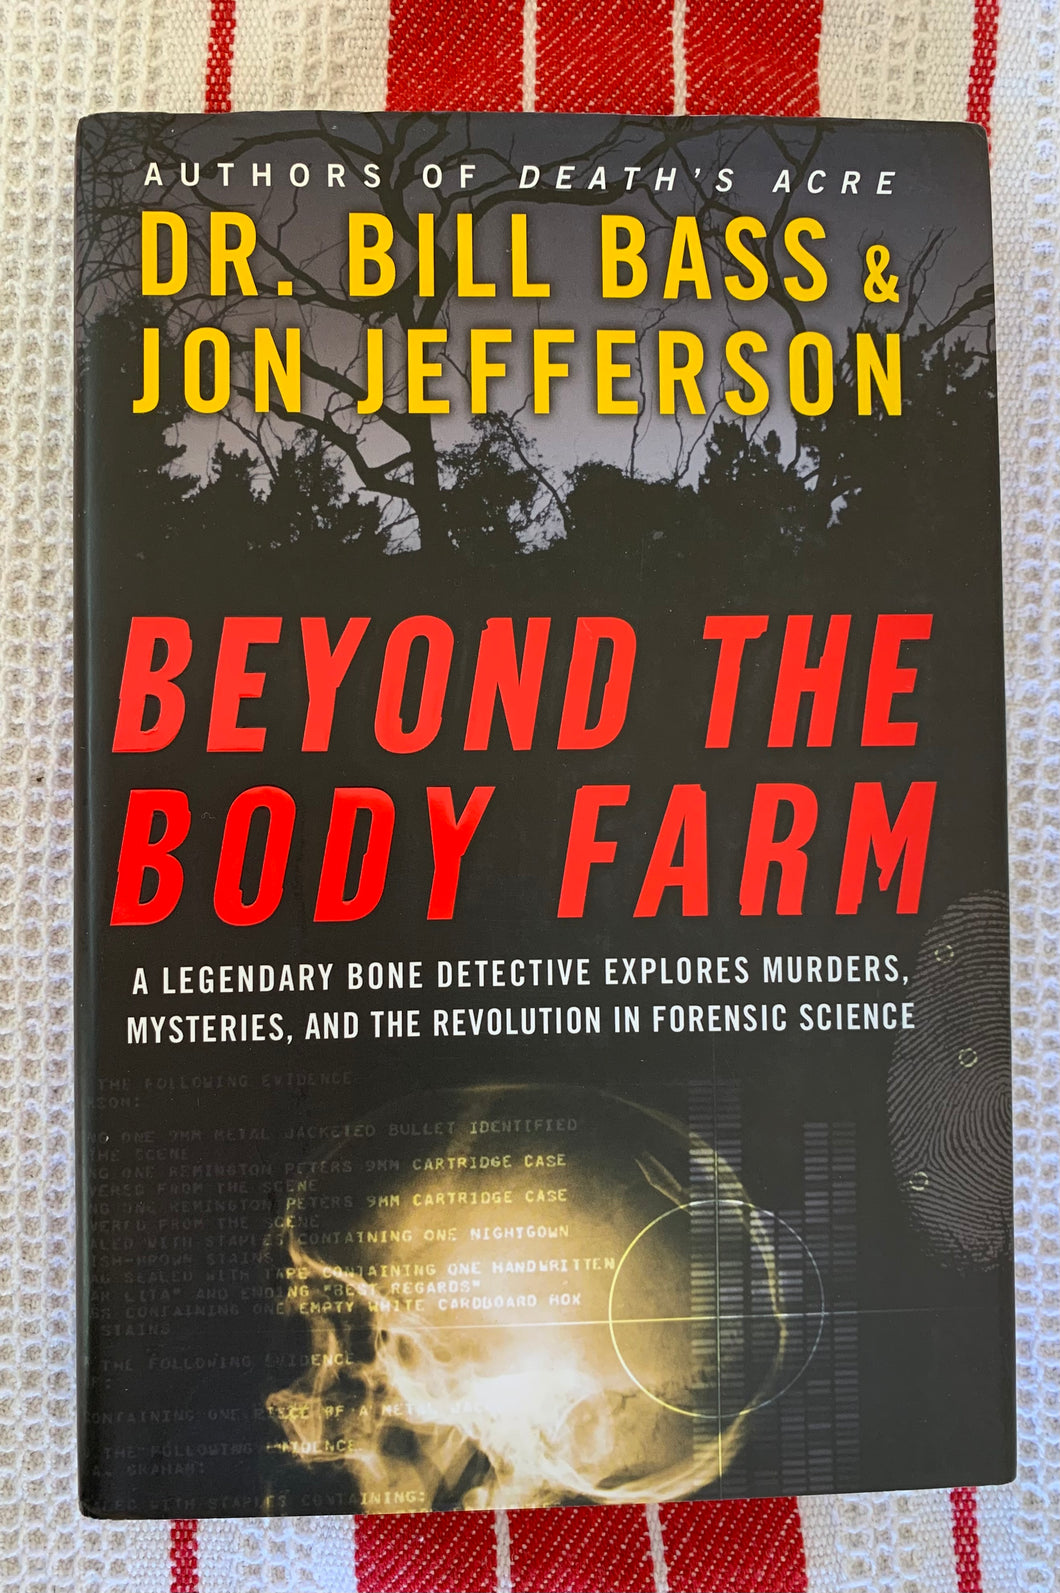 Beyond The Body Farm: A Legendary Bone Detective Explores Murders, Mysteries, And The Revolution In Forensic Science